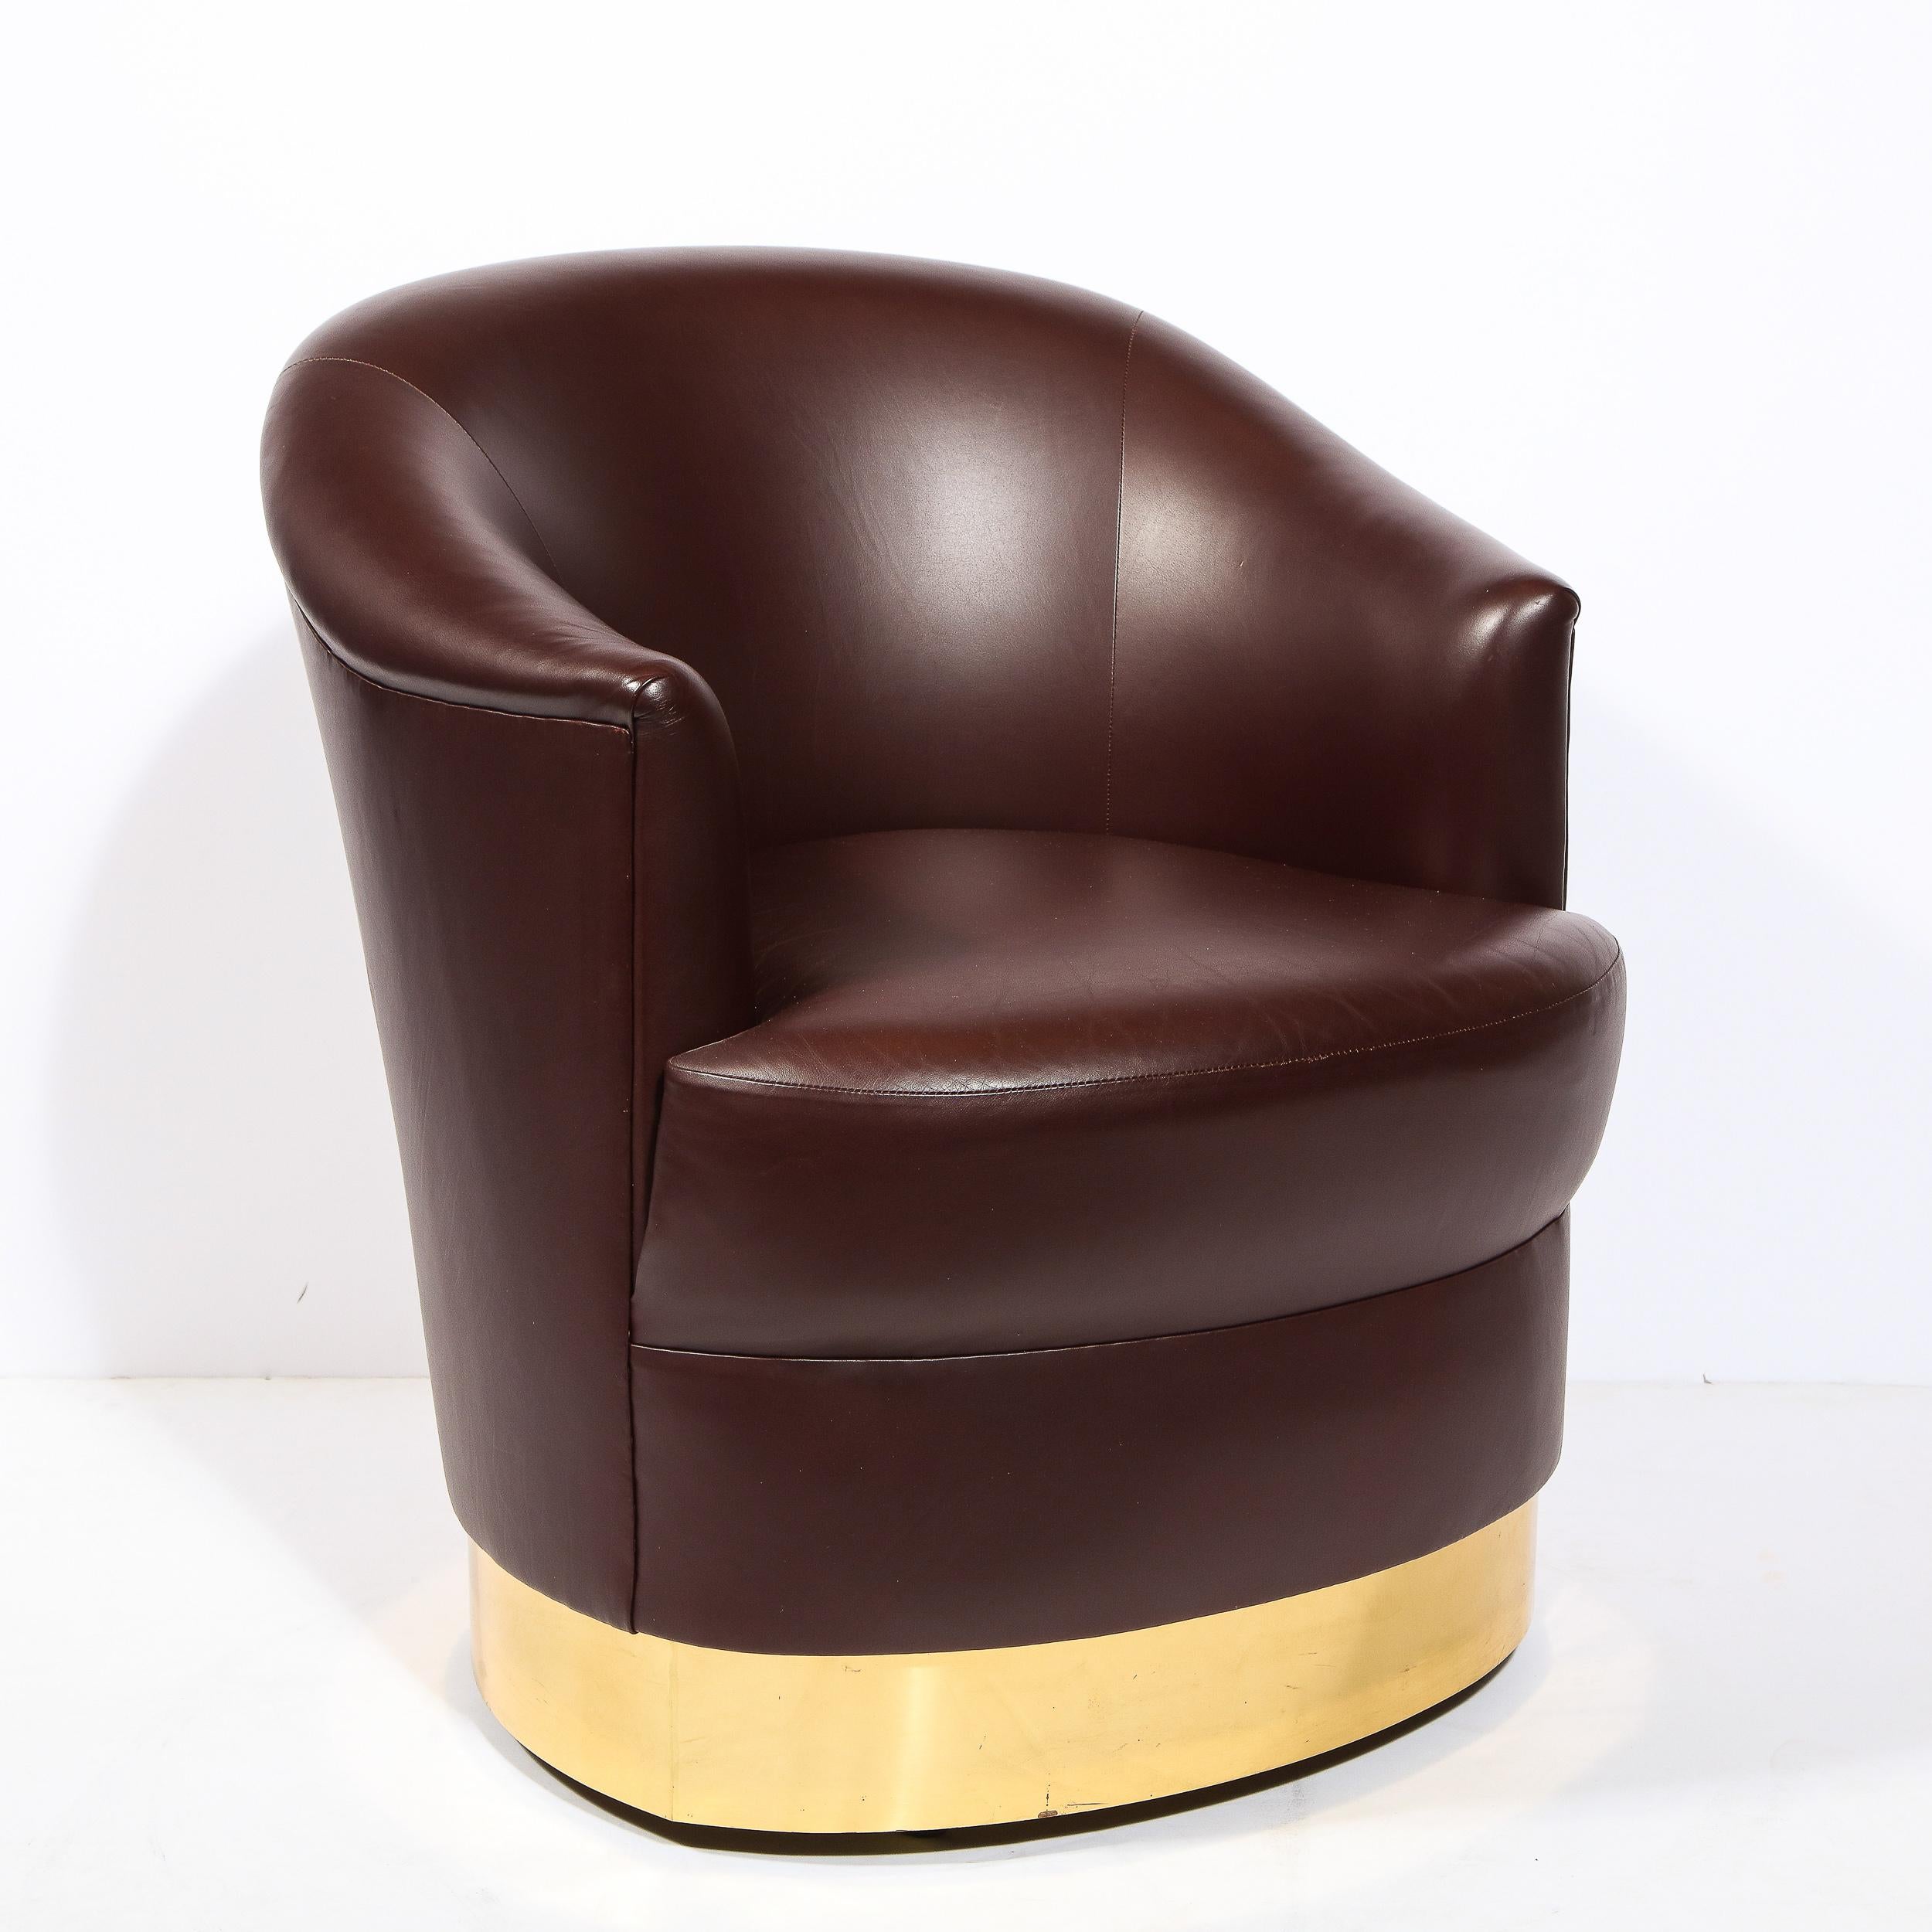 Late 20th Century Documented Karl Springer Mid-Century Brass Wrapped Arm Chair in Edelman Leather